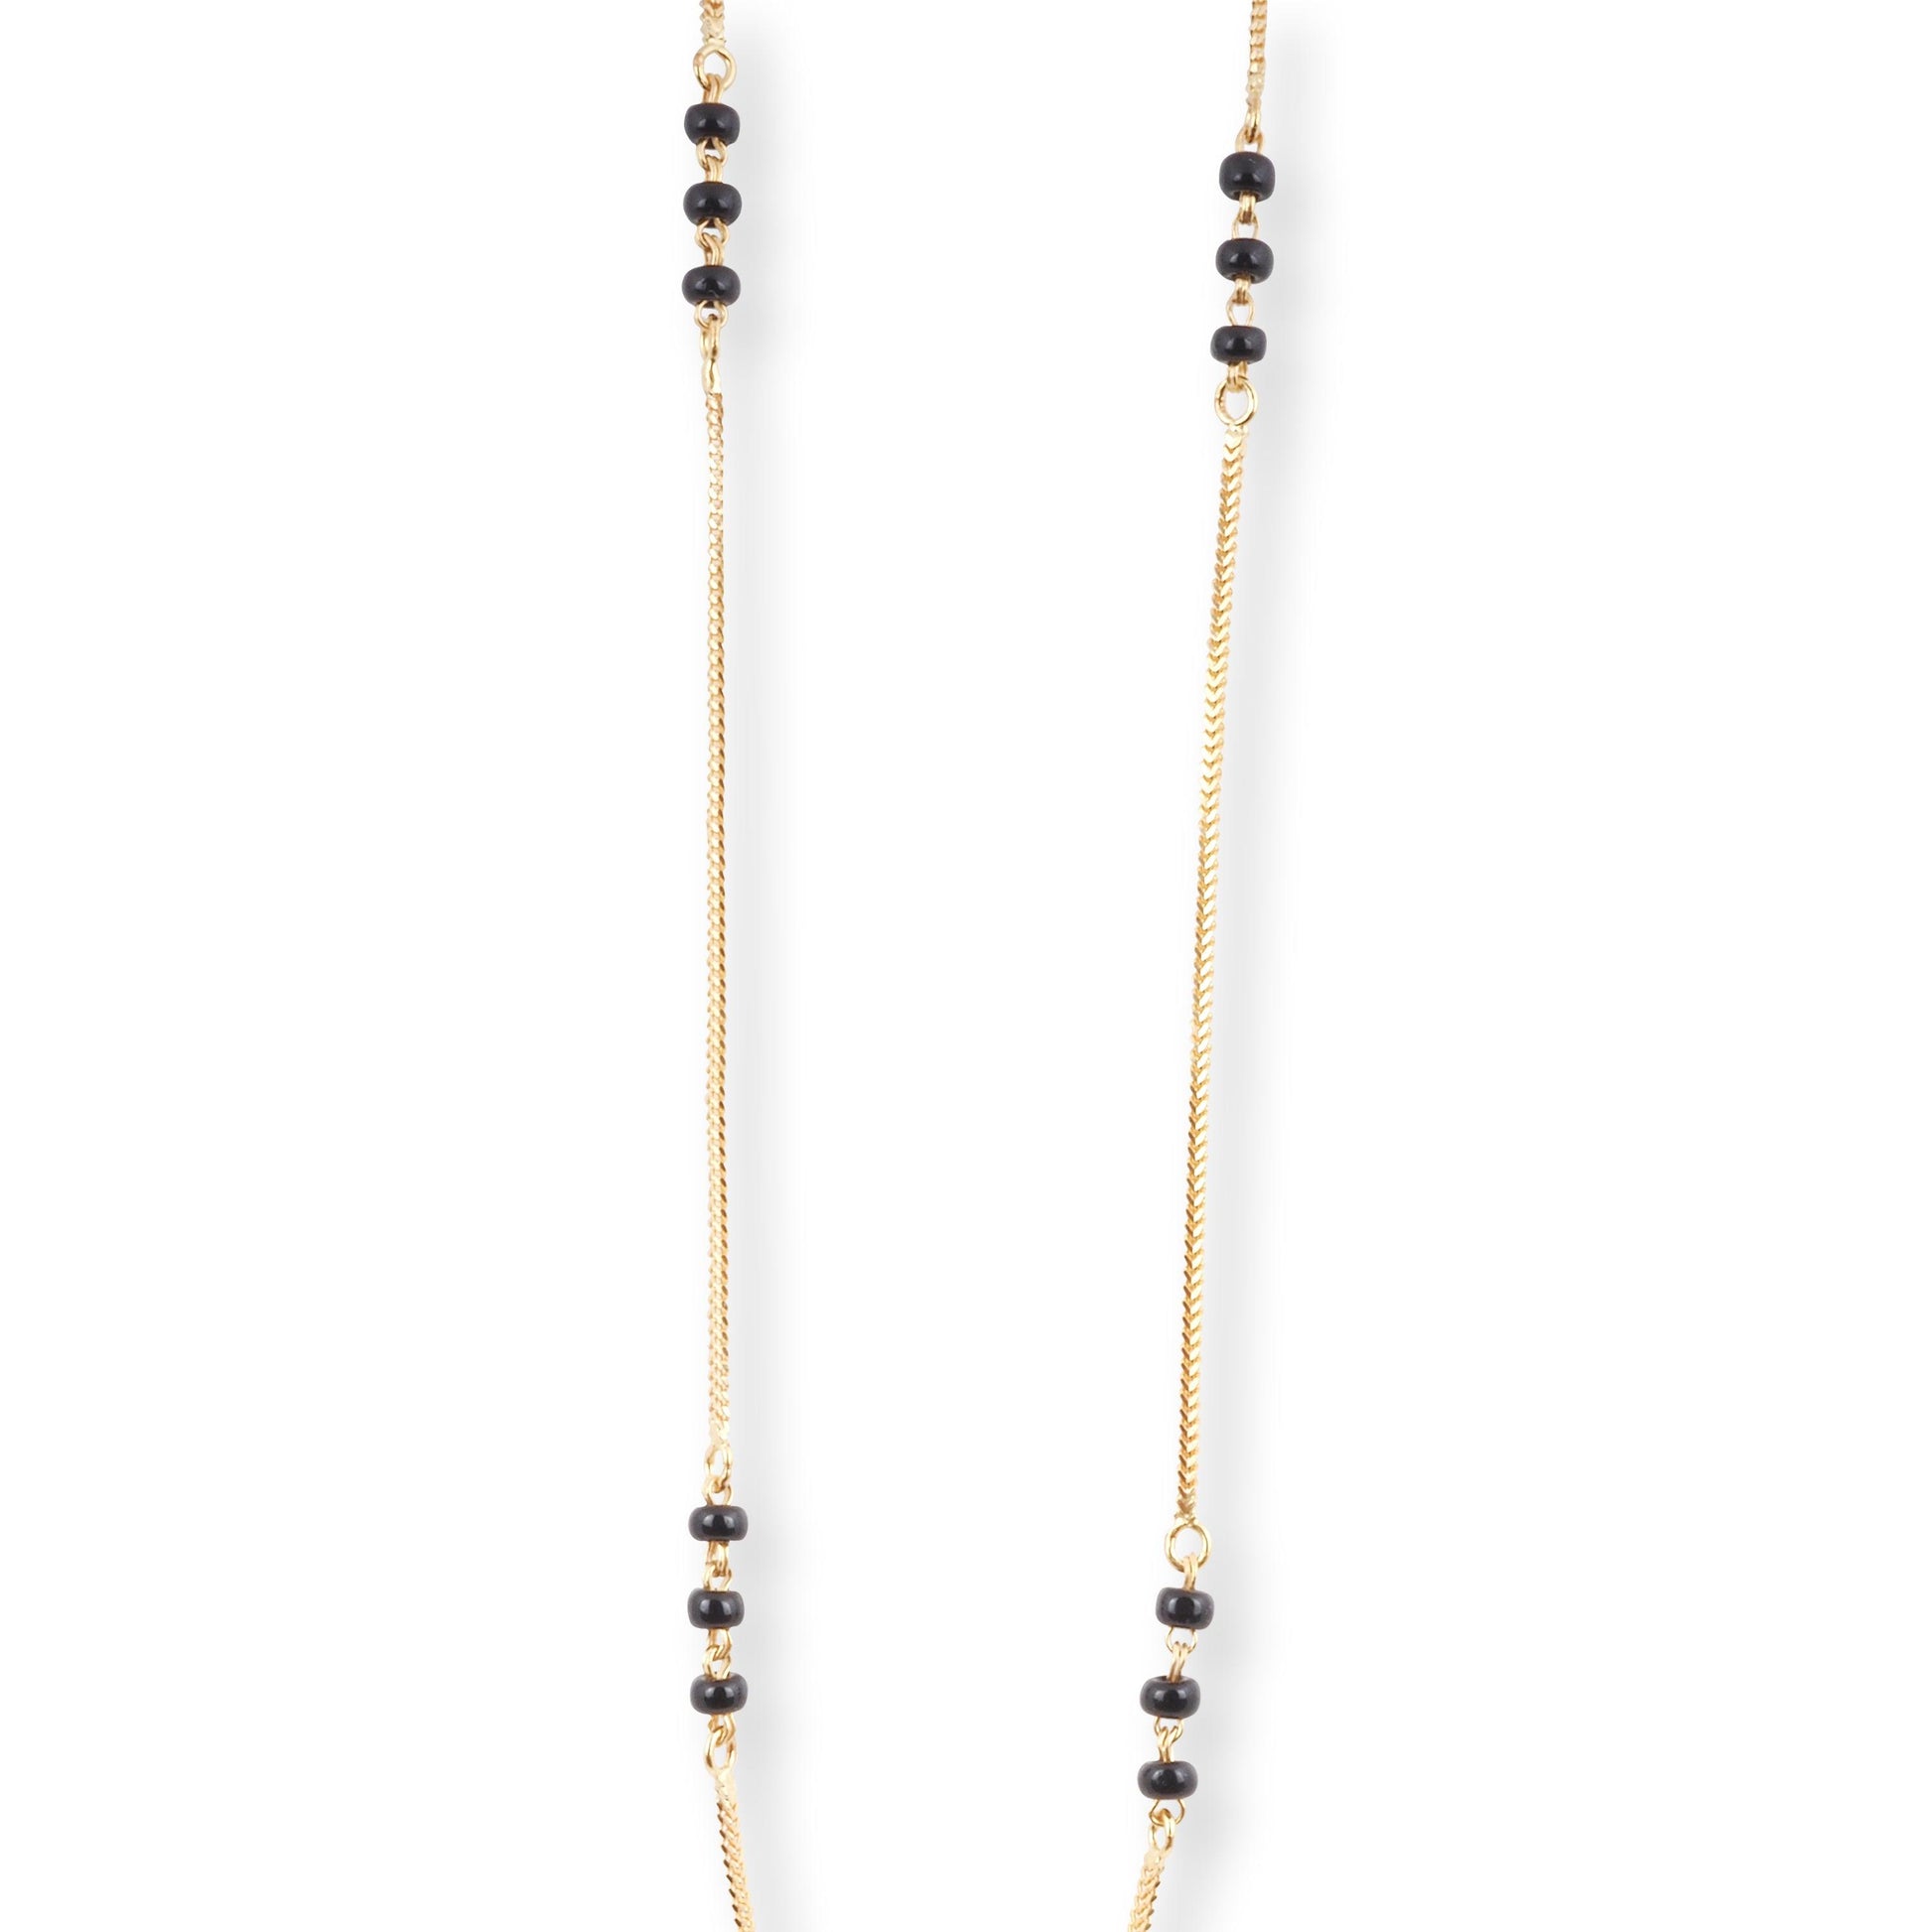 22ct Gold Foxtail Chain with Three Black Beads at Intervals with Bolt Ring Clasp C-3819 - Minar Jewellers